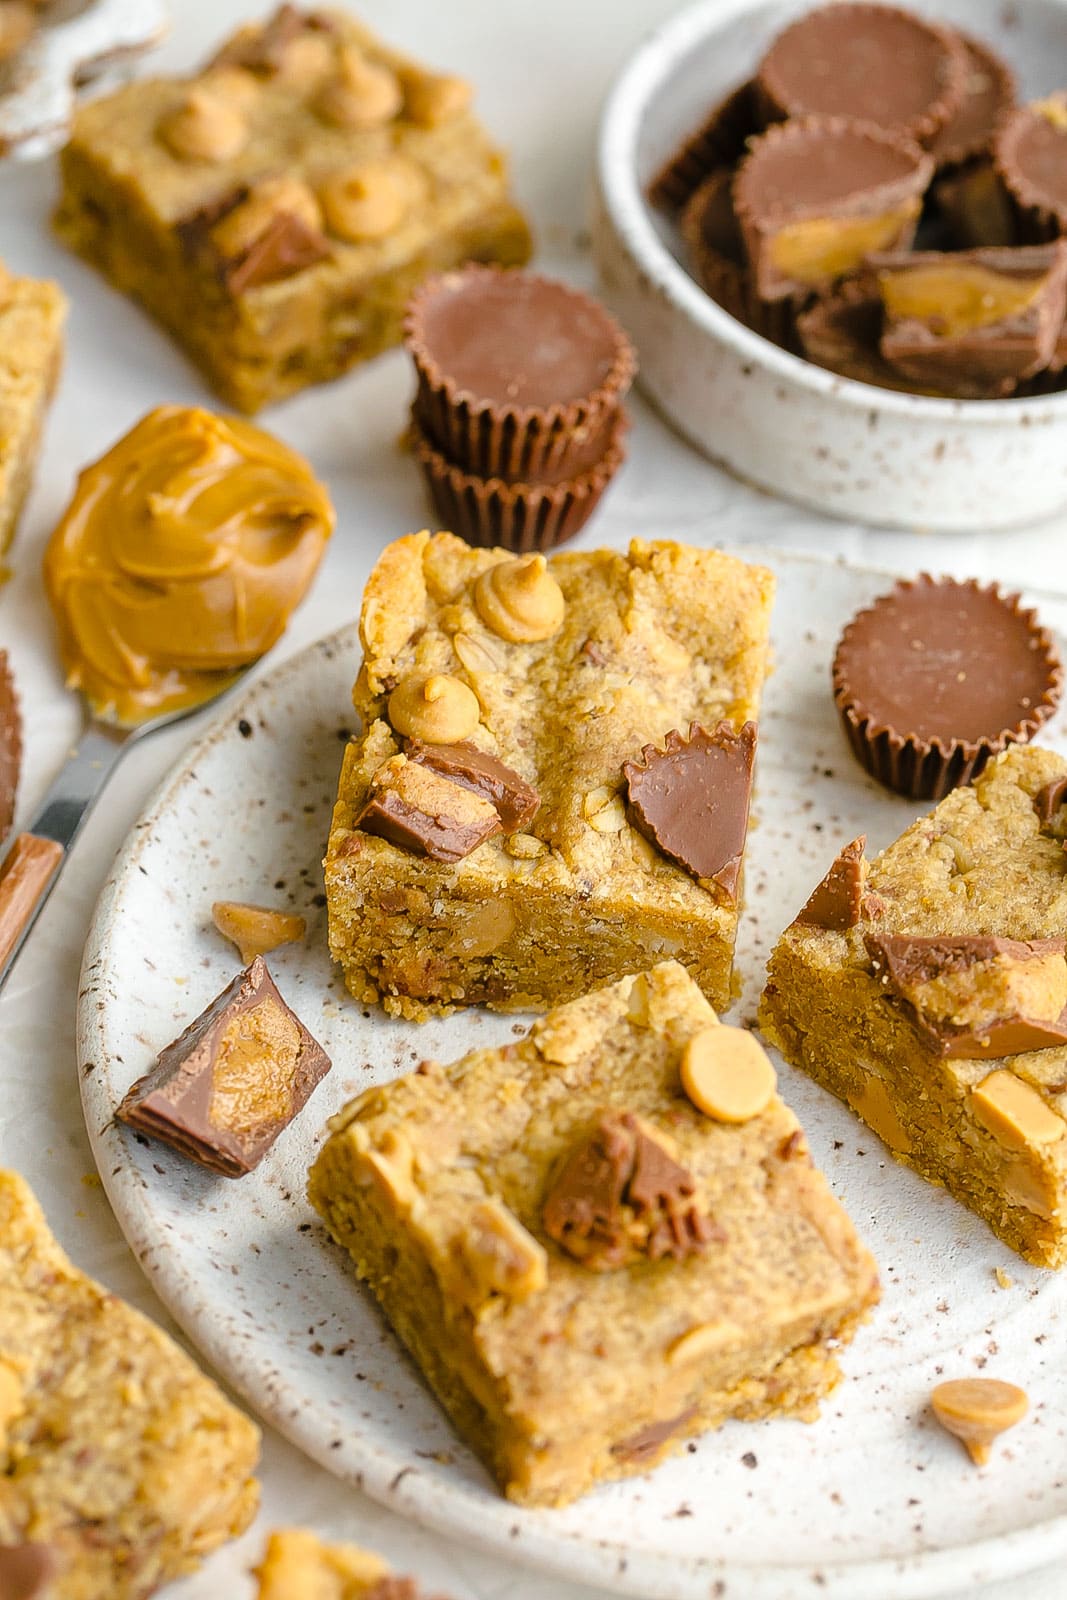 Peanut butter cup bars on a plate with a spoonful of peanut butter.